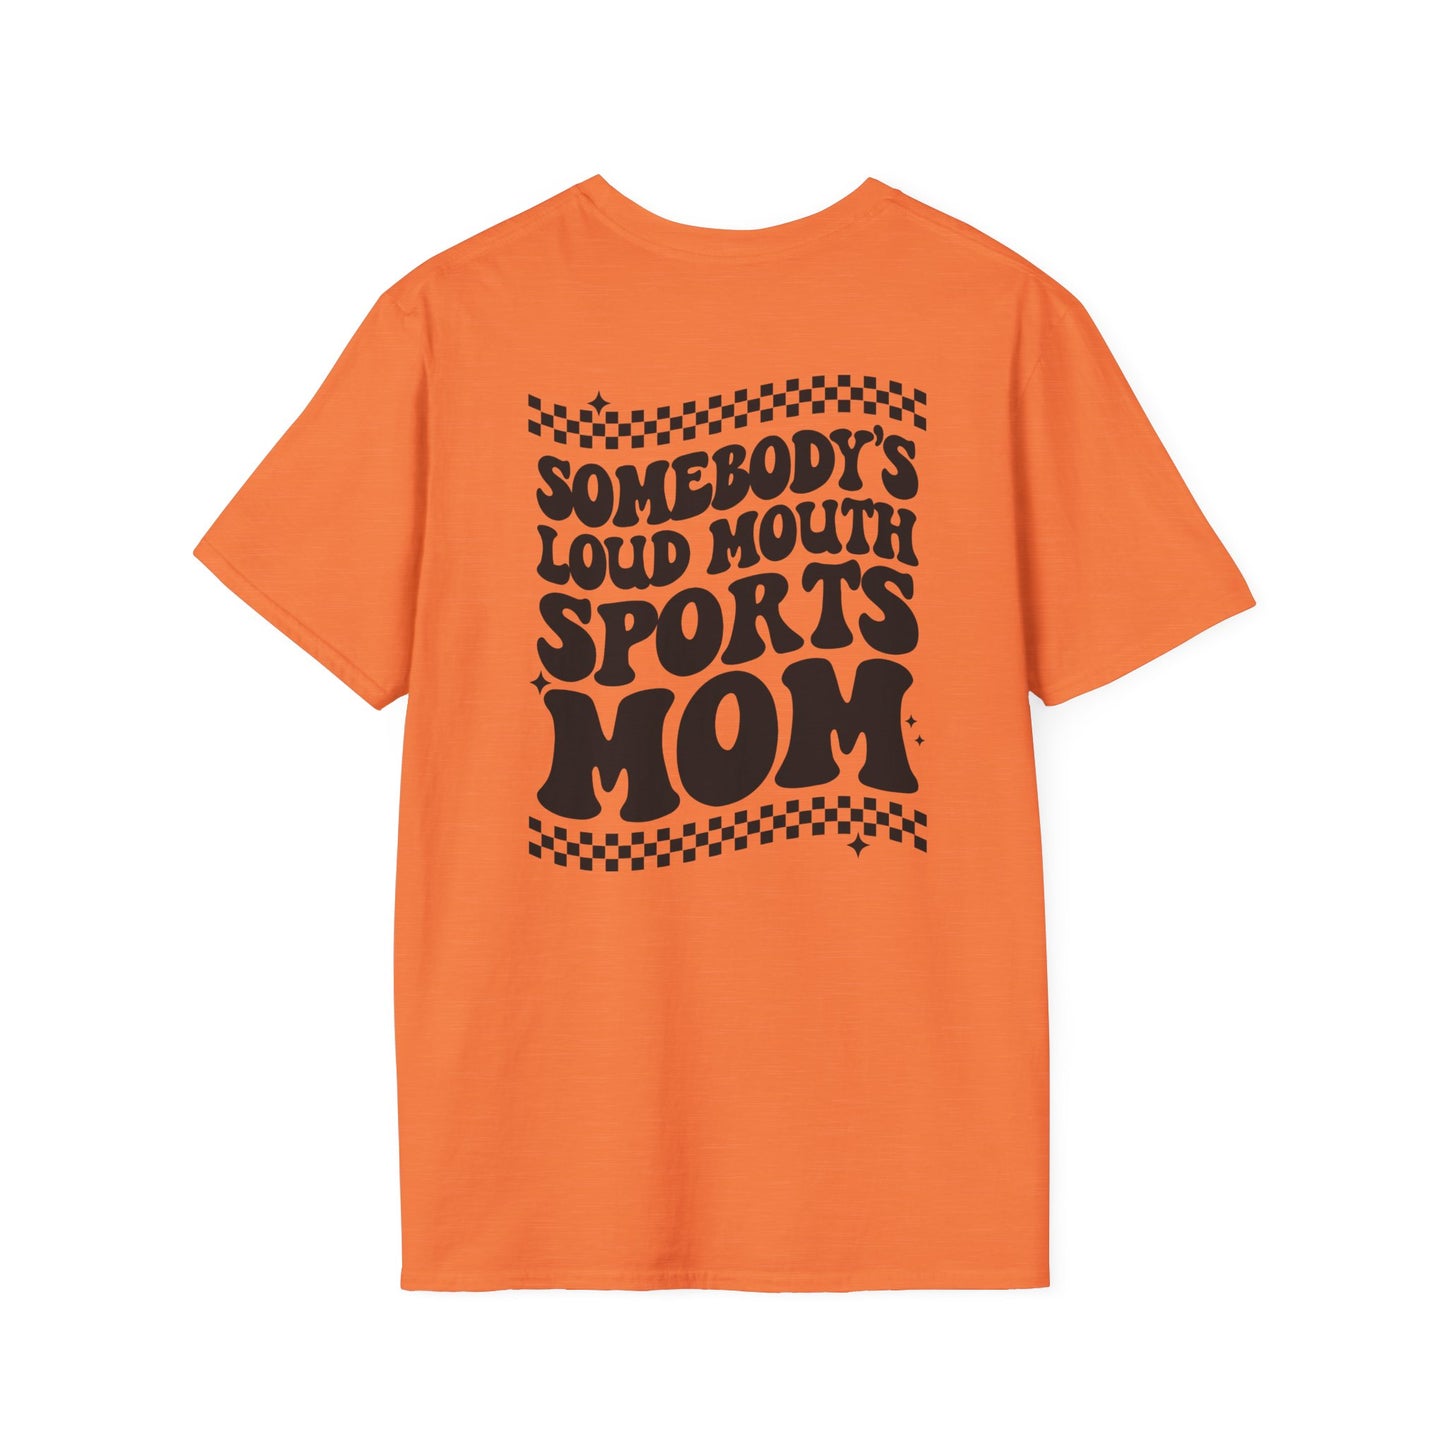 Loud Mouth Sports Mom - Unisex Softstyle T-Shirt